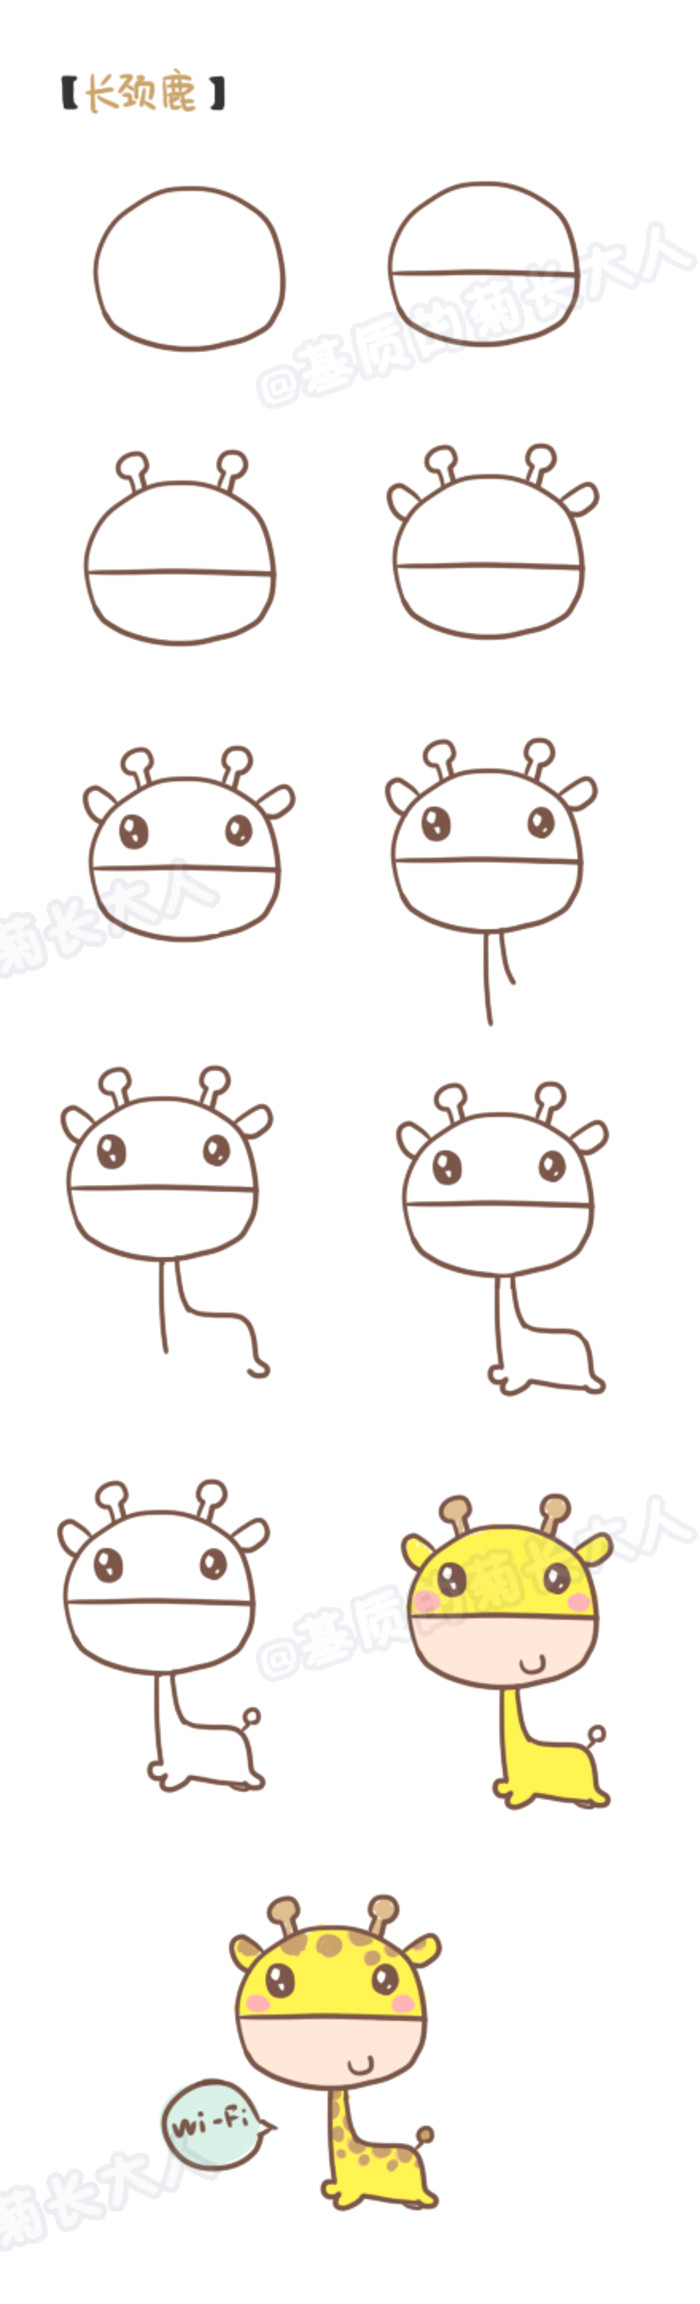 Easy Drawings Giraffe How to Draw A Giraffe Daisy Grew Up In Person From the Matrix